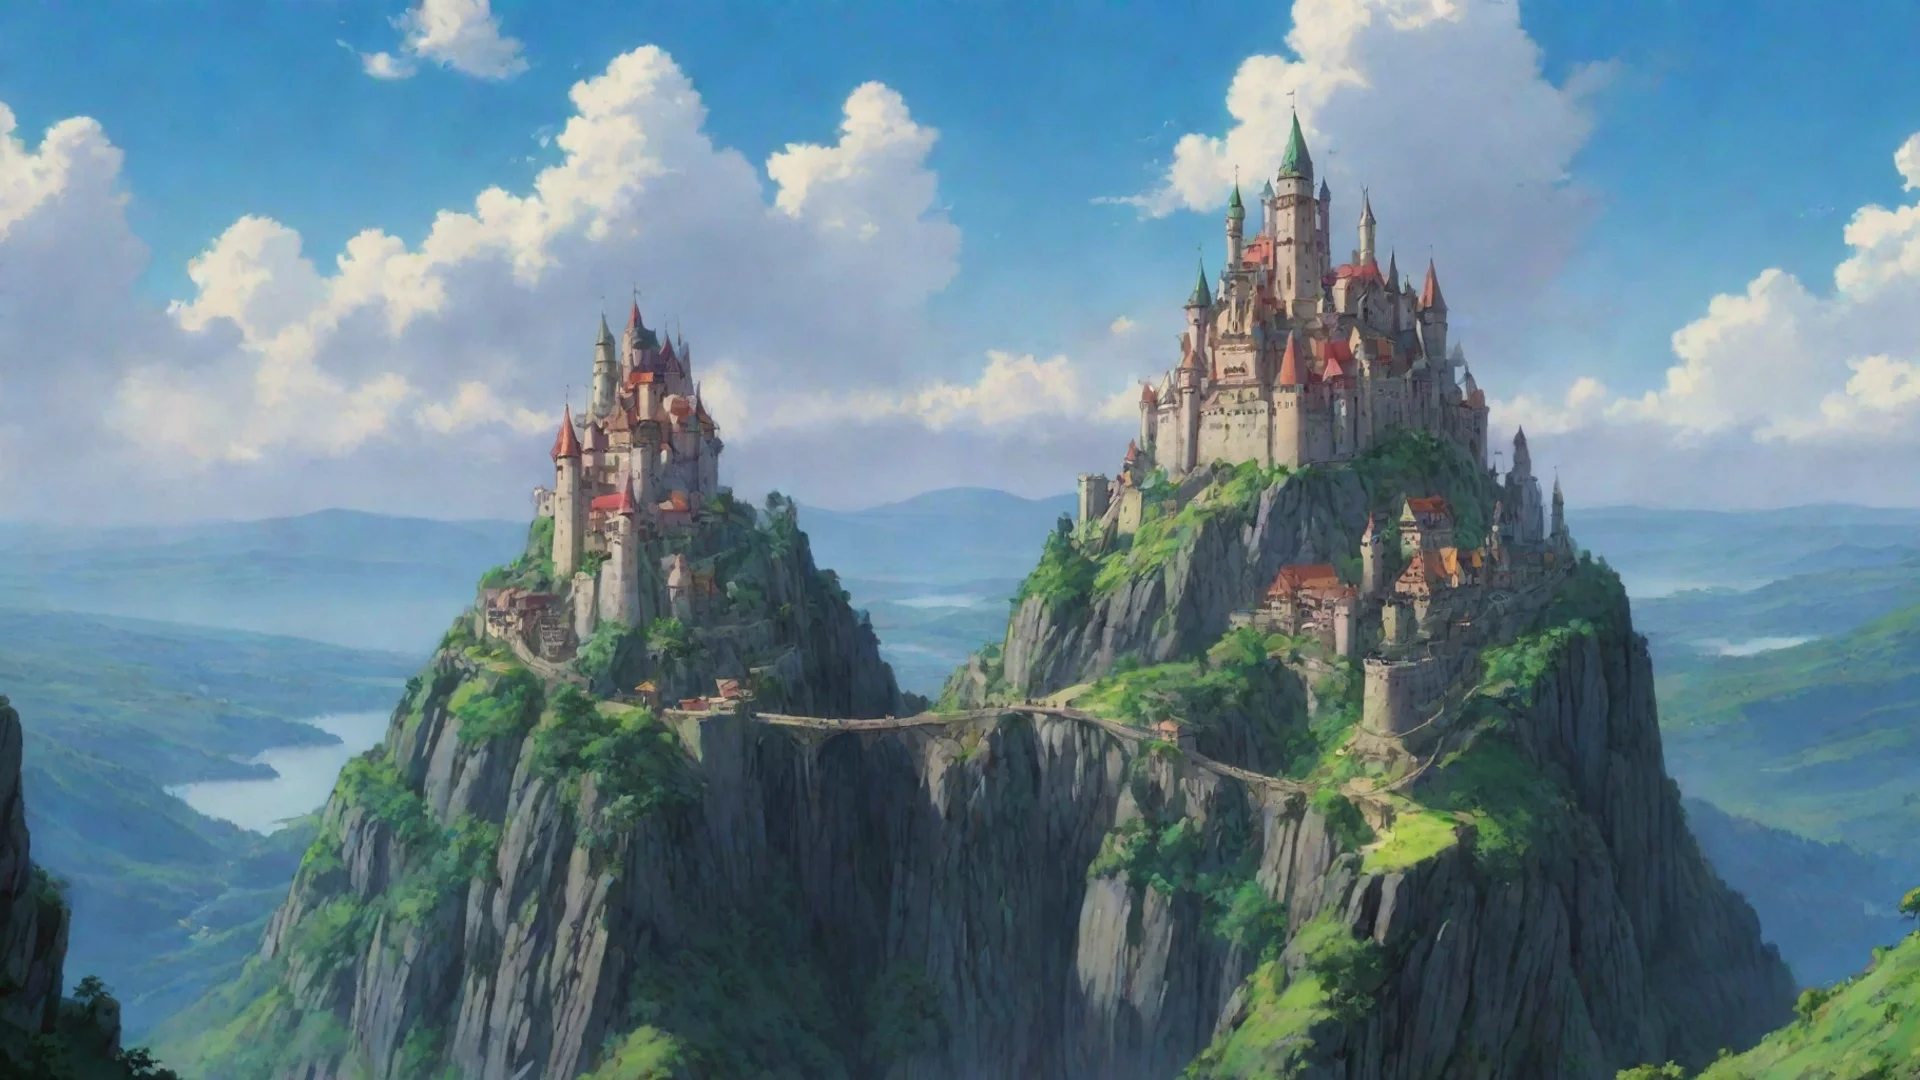 aiamazing kingdom of heaven ghibli amazing environment colorful extreme lovely awesome portrait 2 wide